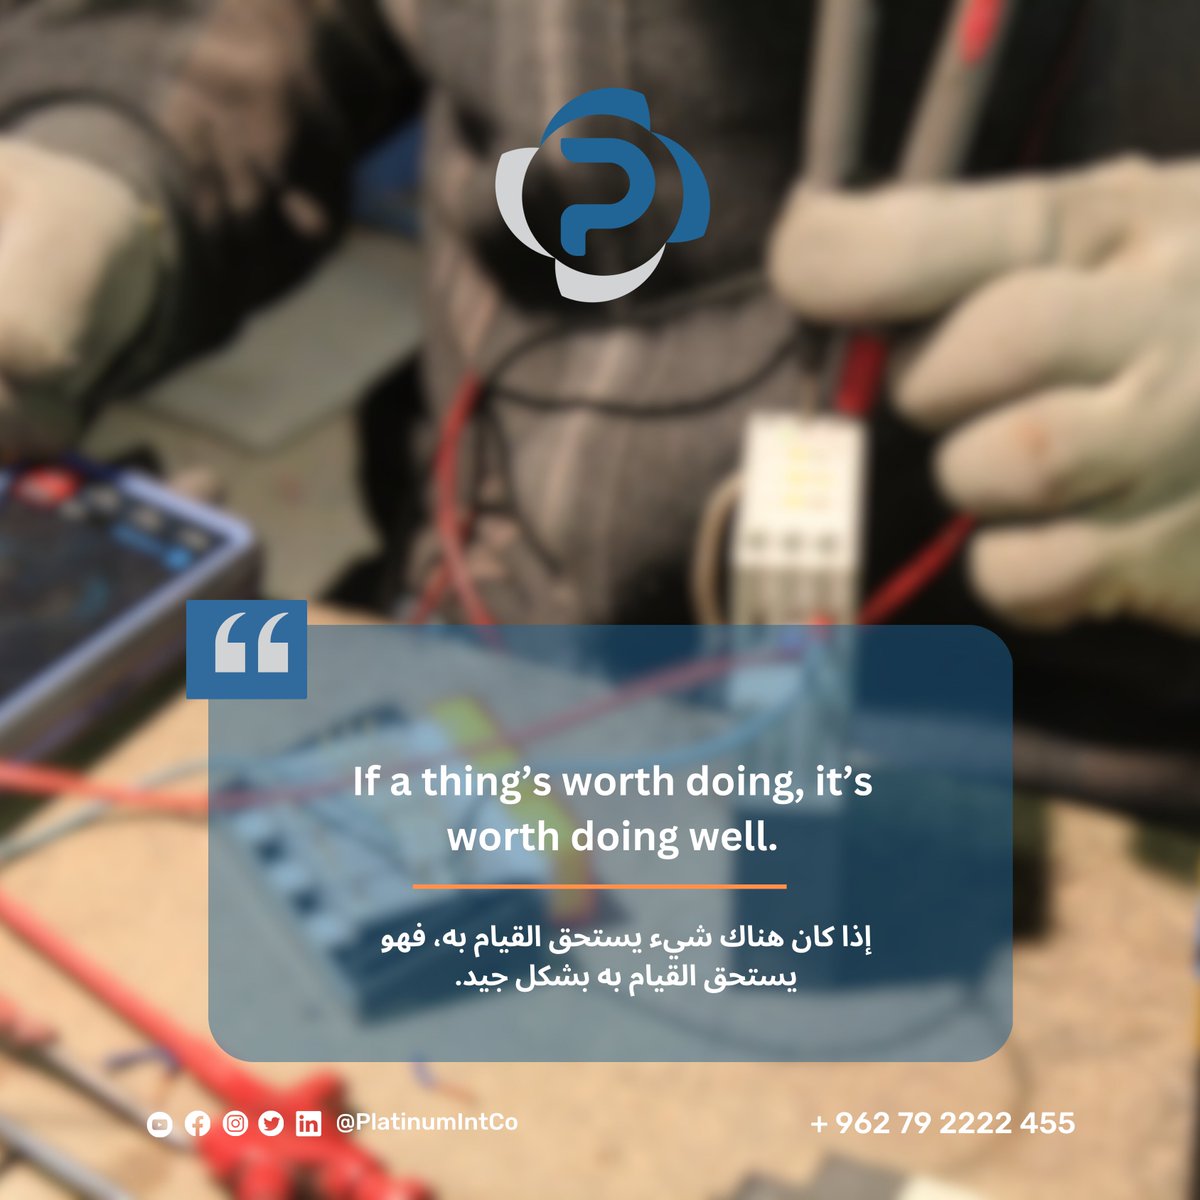 Excellence is not just a choice, it's our commitment!
At Platinum International, From cutting-edge services to top-notch industrial products, we're dedicated to delivering excellence in every aspect of what we do
#industrial #IndustrialSupplier #PlatinumInternational  #middleeast